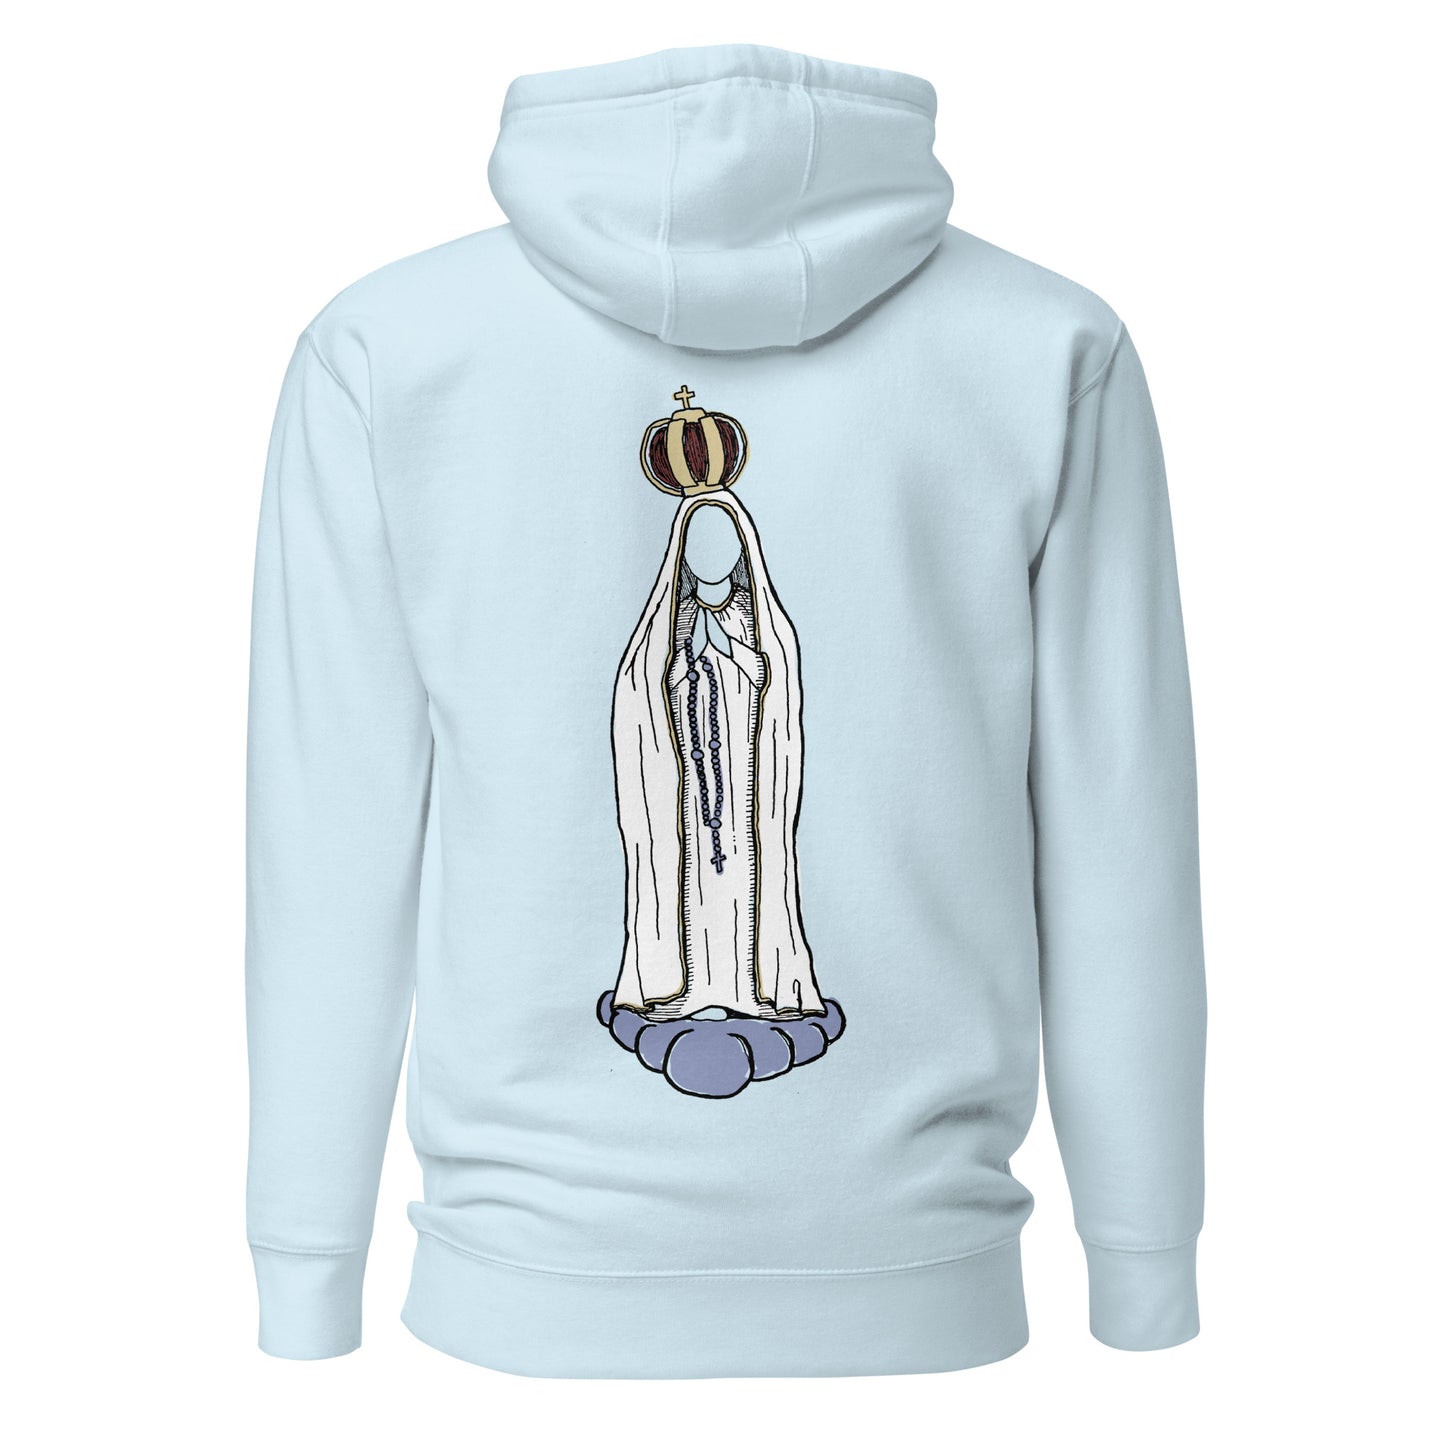 "Our Lady of Fatima" - Unisex Hoodie